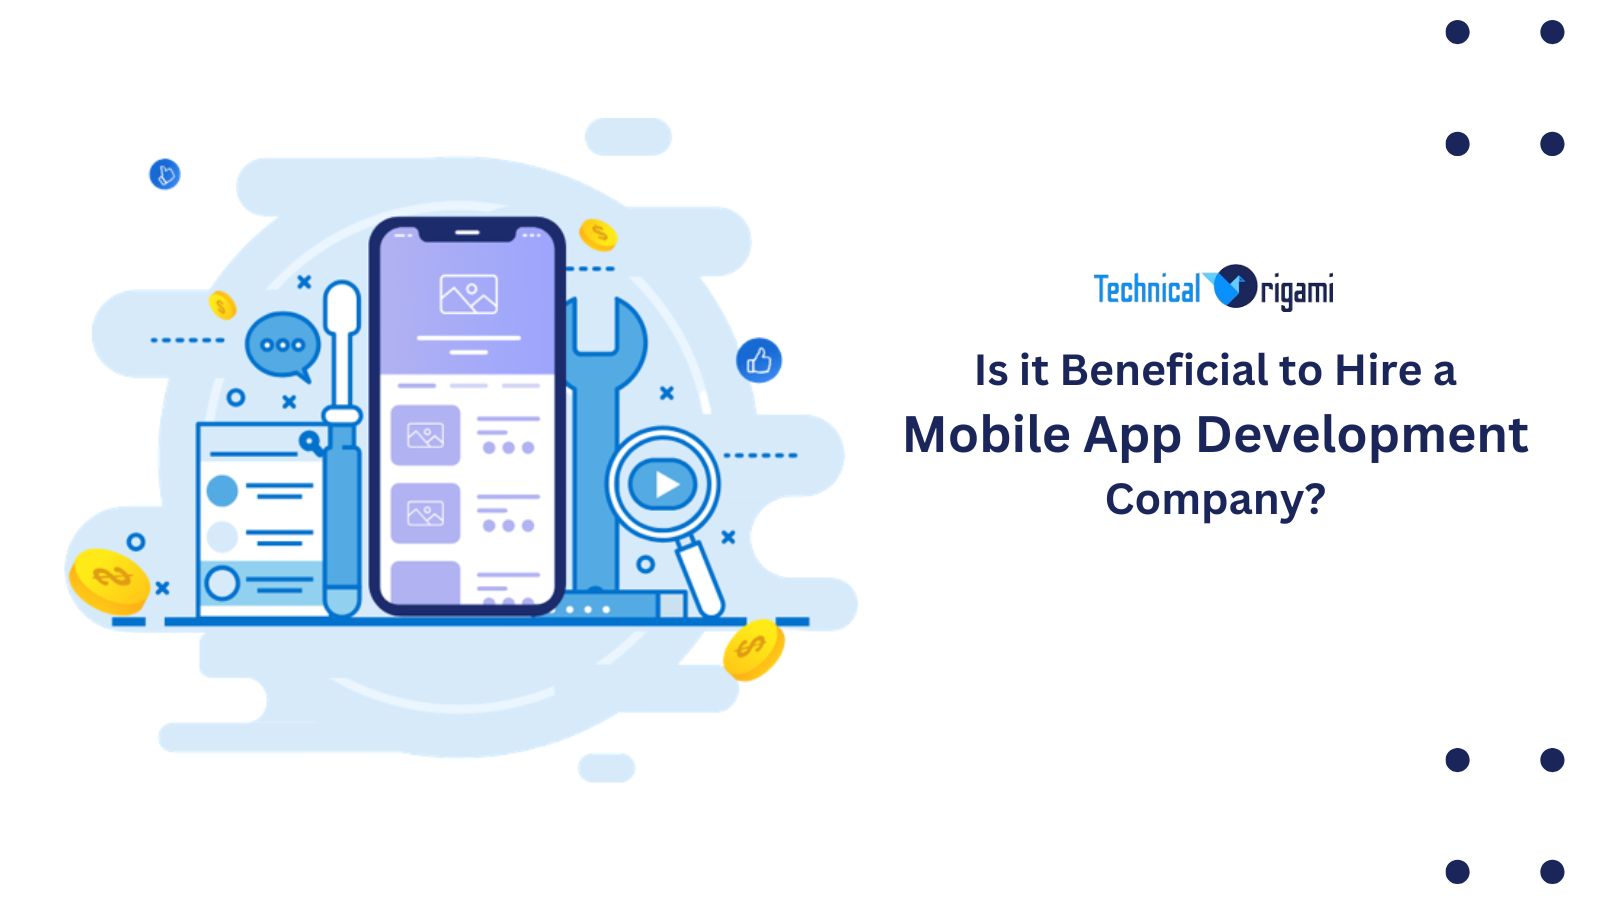 Is it Beneficial to Hire a Mobile App Development Company?